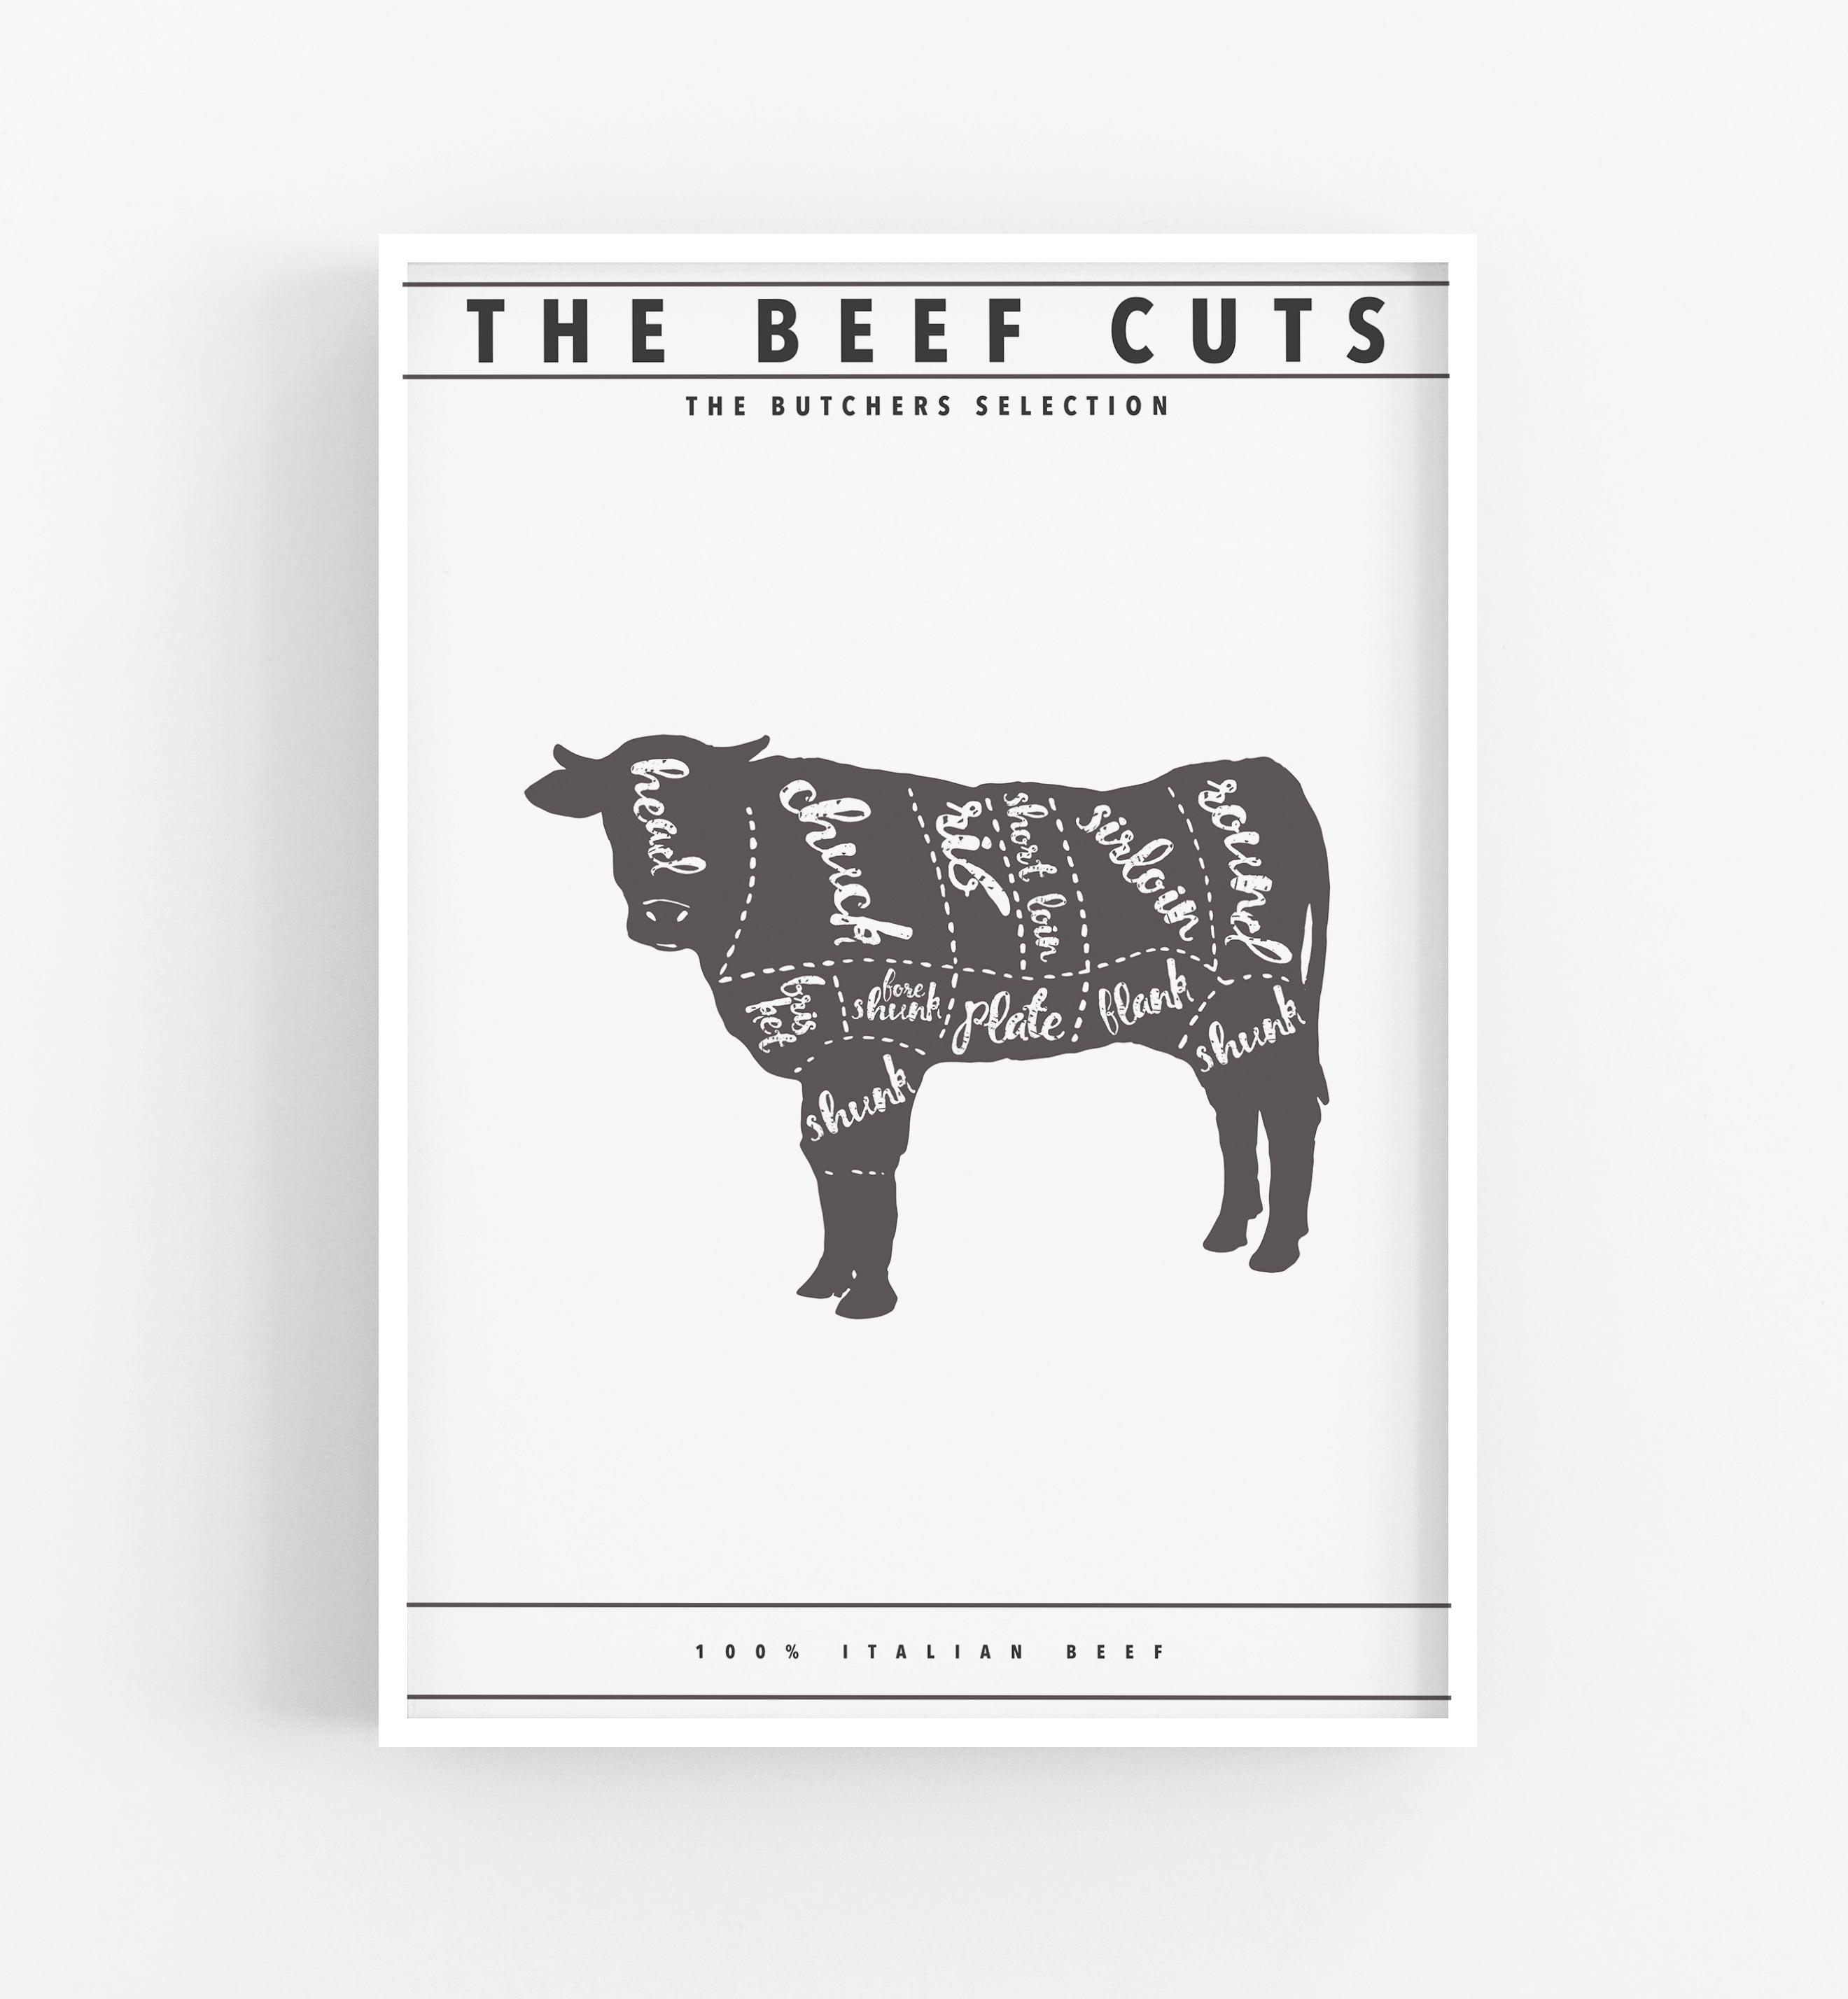 The beef cuts